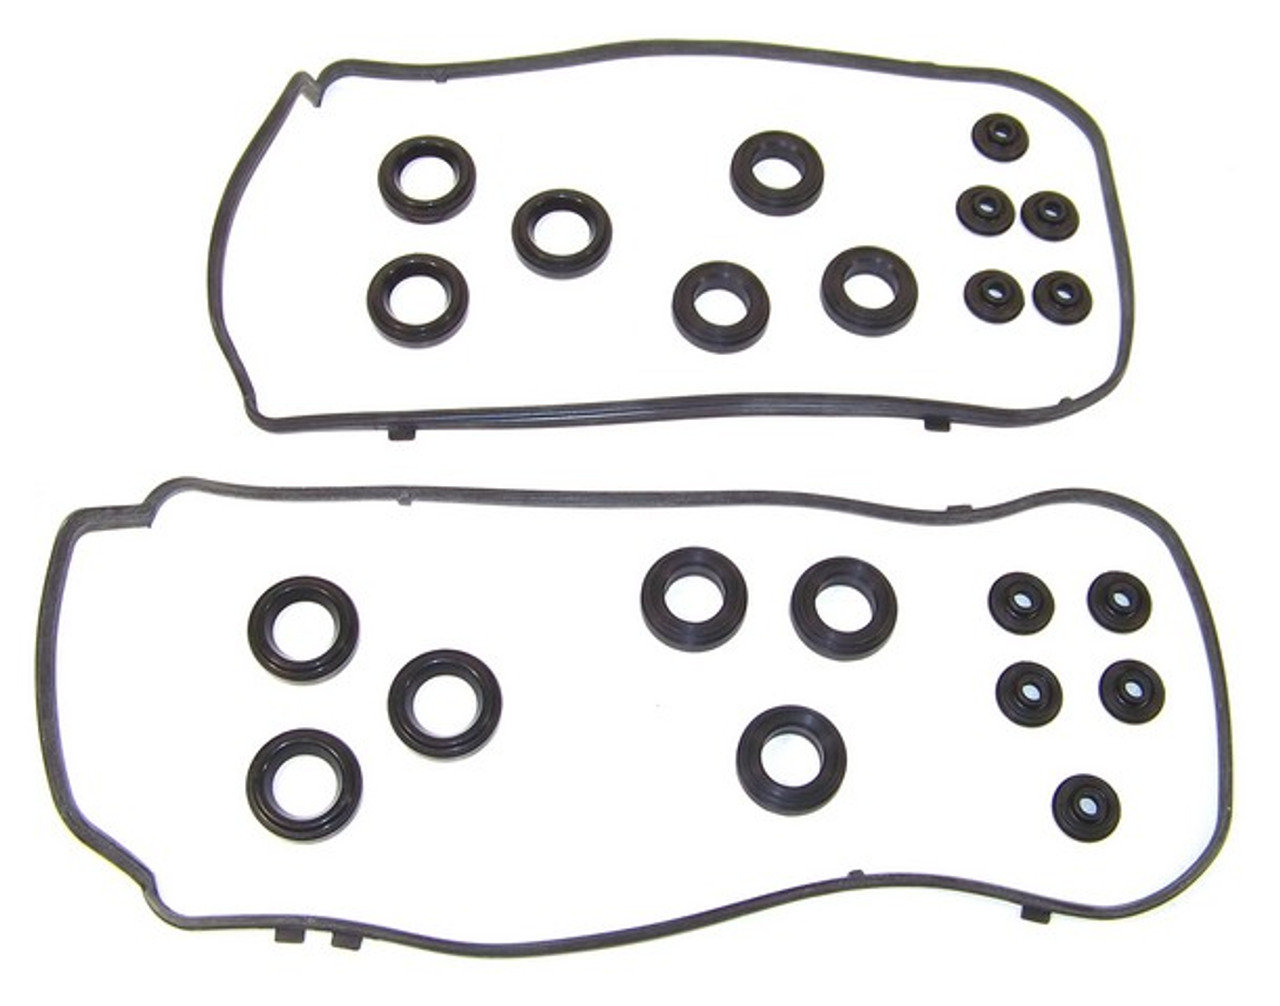 Valve Cover Gasket Set 3.5L 2012 Acura TL - VC268G.20